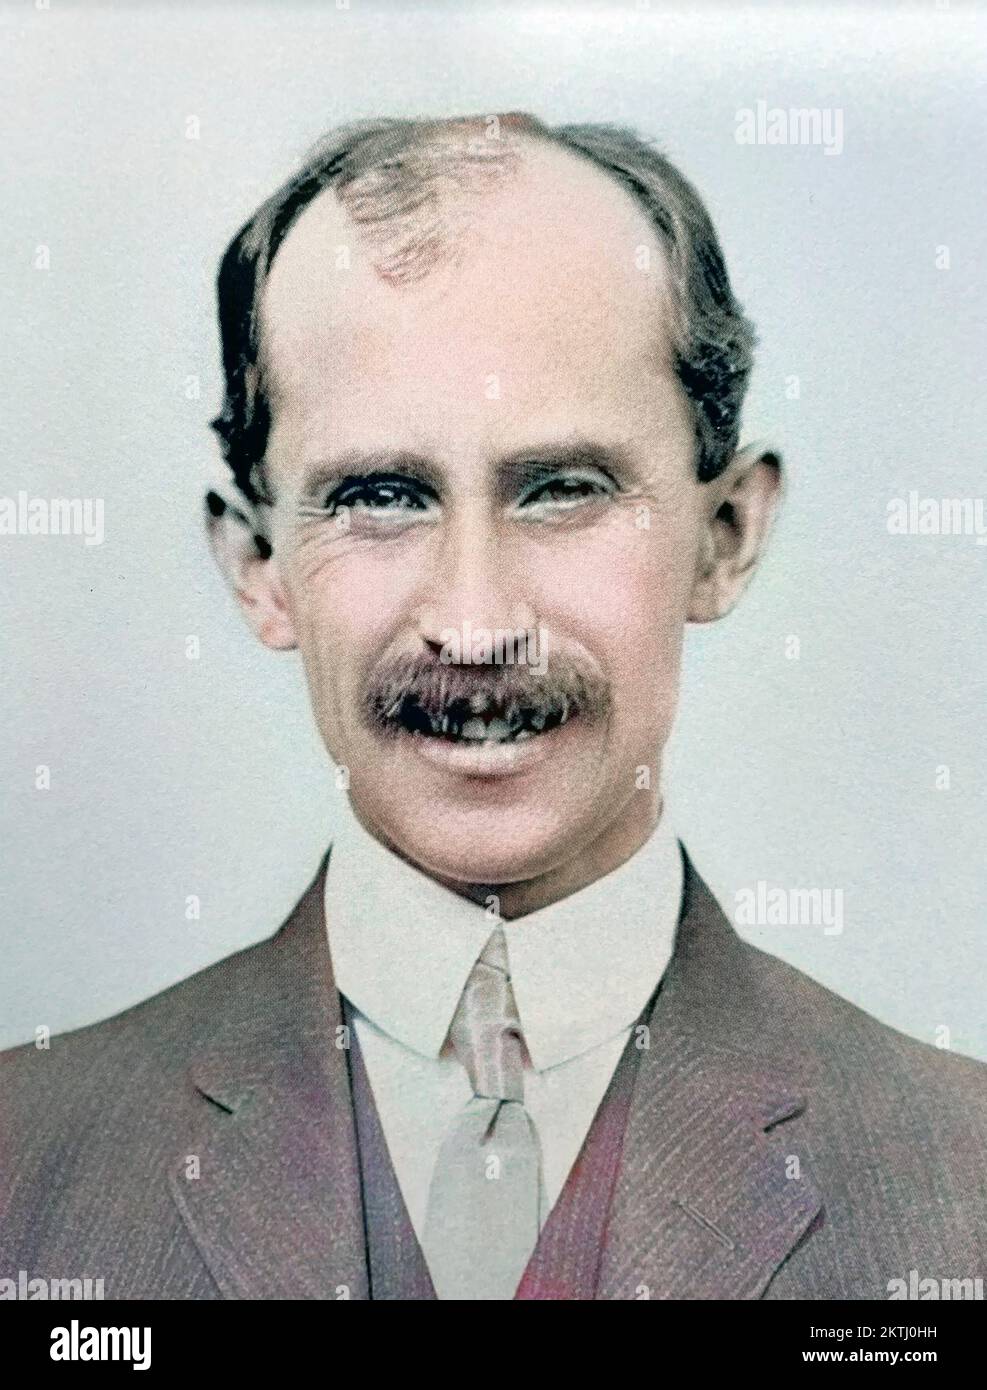 ORVILLE WRIGHT (1871-1948) American aviation pioneer about 1910 Stock Photo